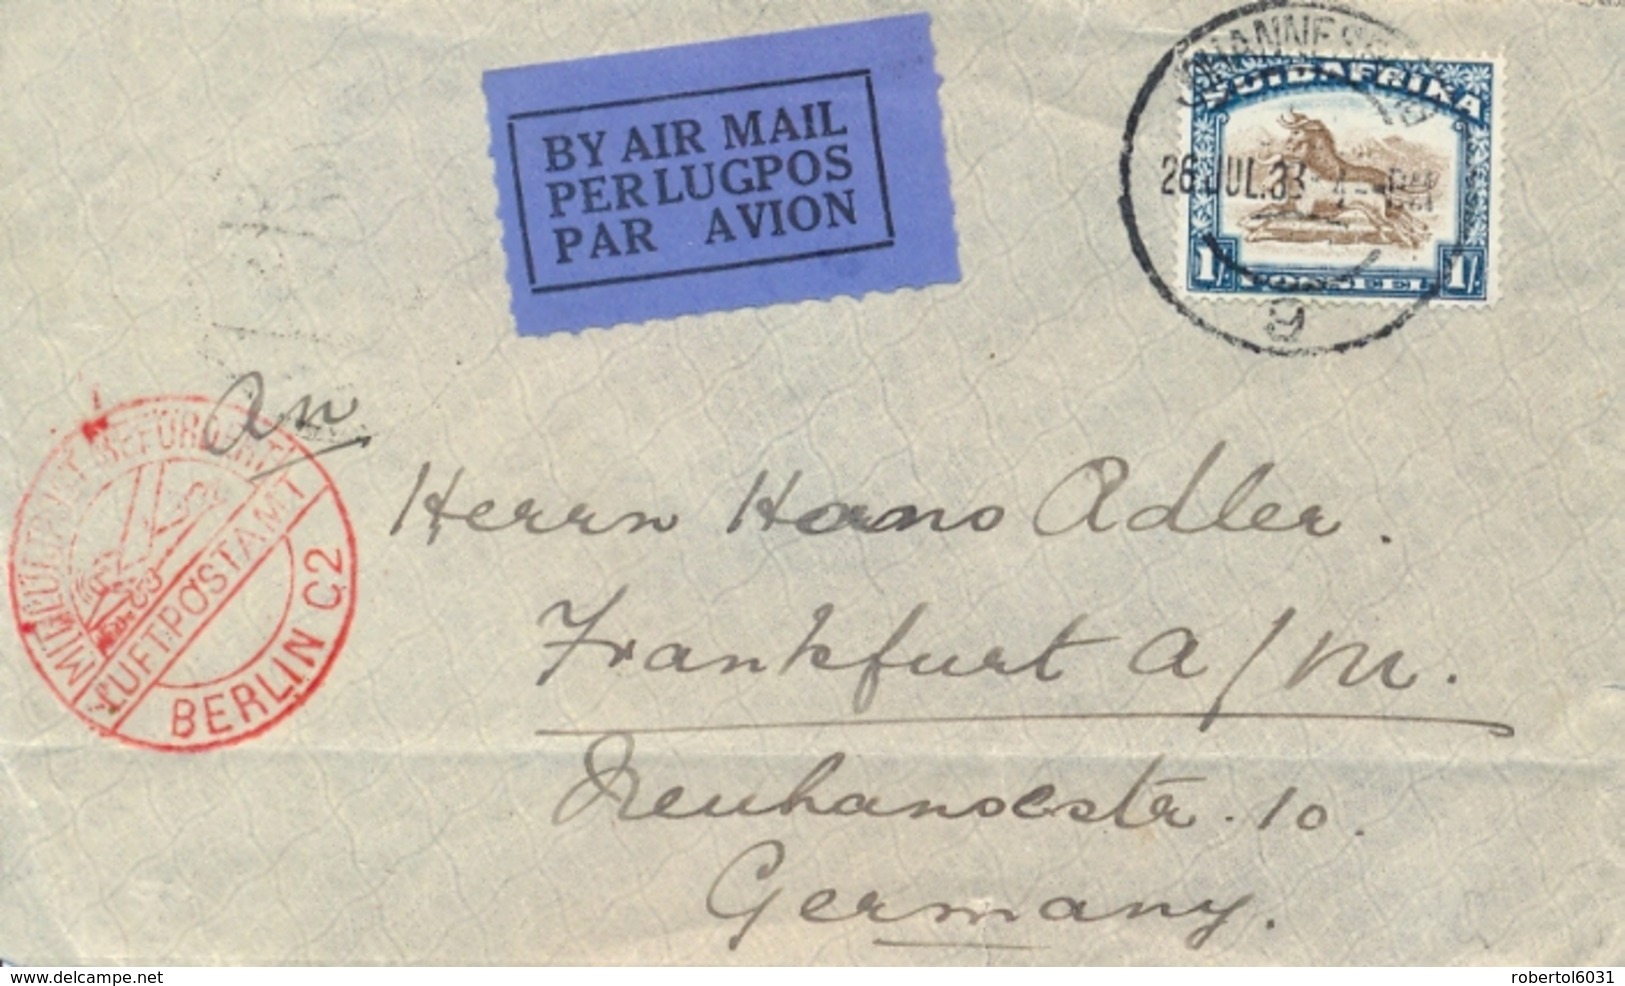 South Africa 1933 Cover By Airmail To Germany With Arrival Red Handstamp Luftpostamt Berlin C2 - Airmail